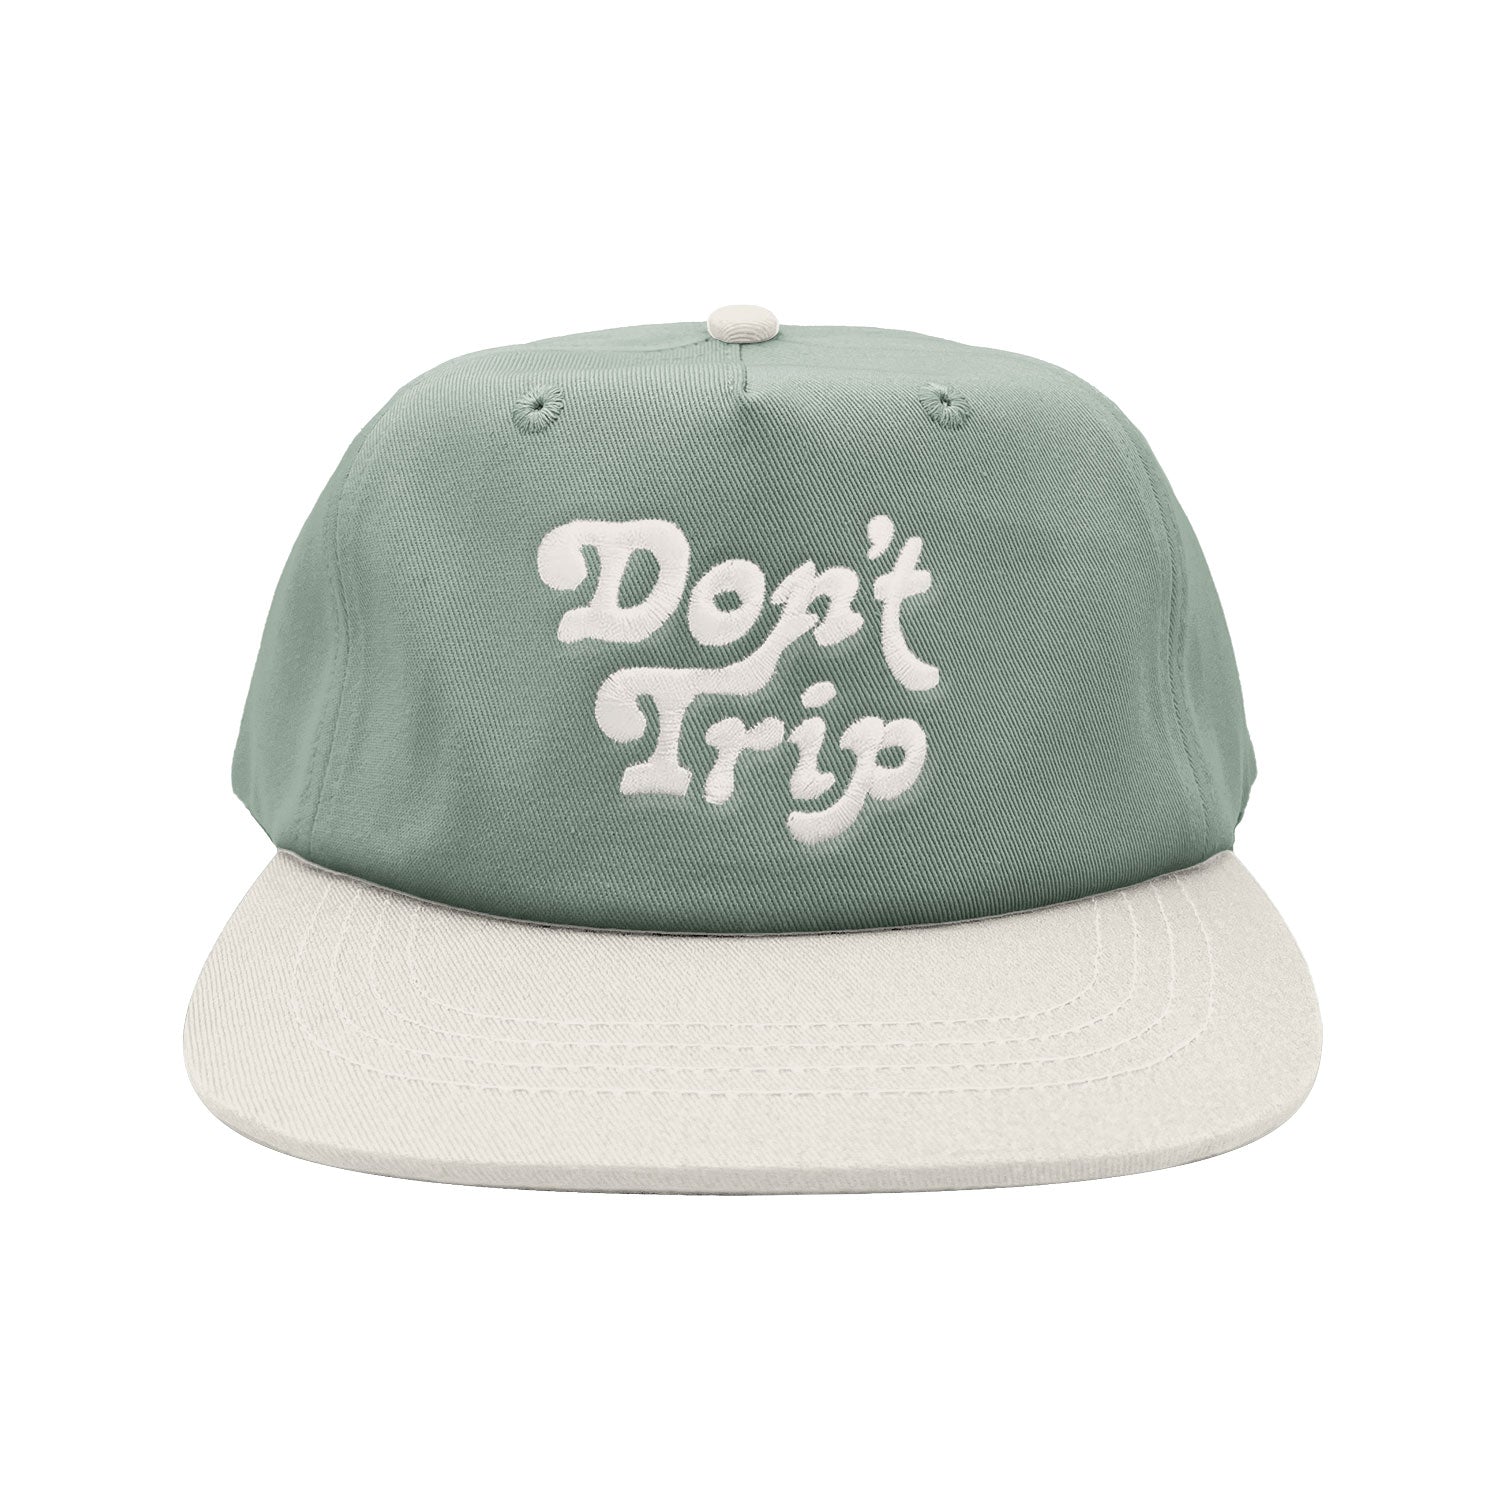 Don't Trip sage and white hat with white embroidered Don't Trip logo on white background - Free & Easy